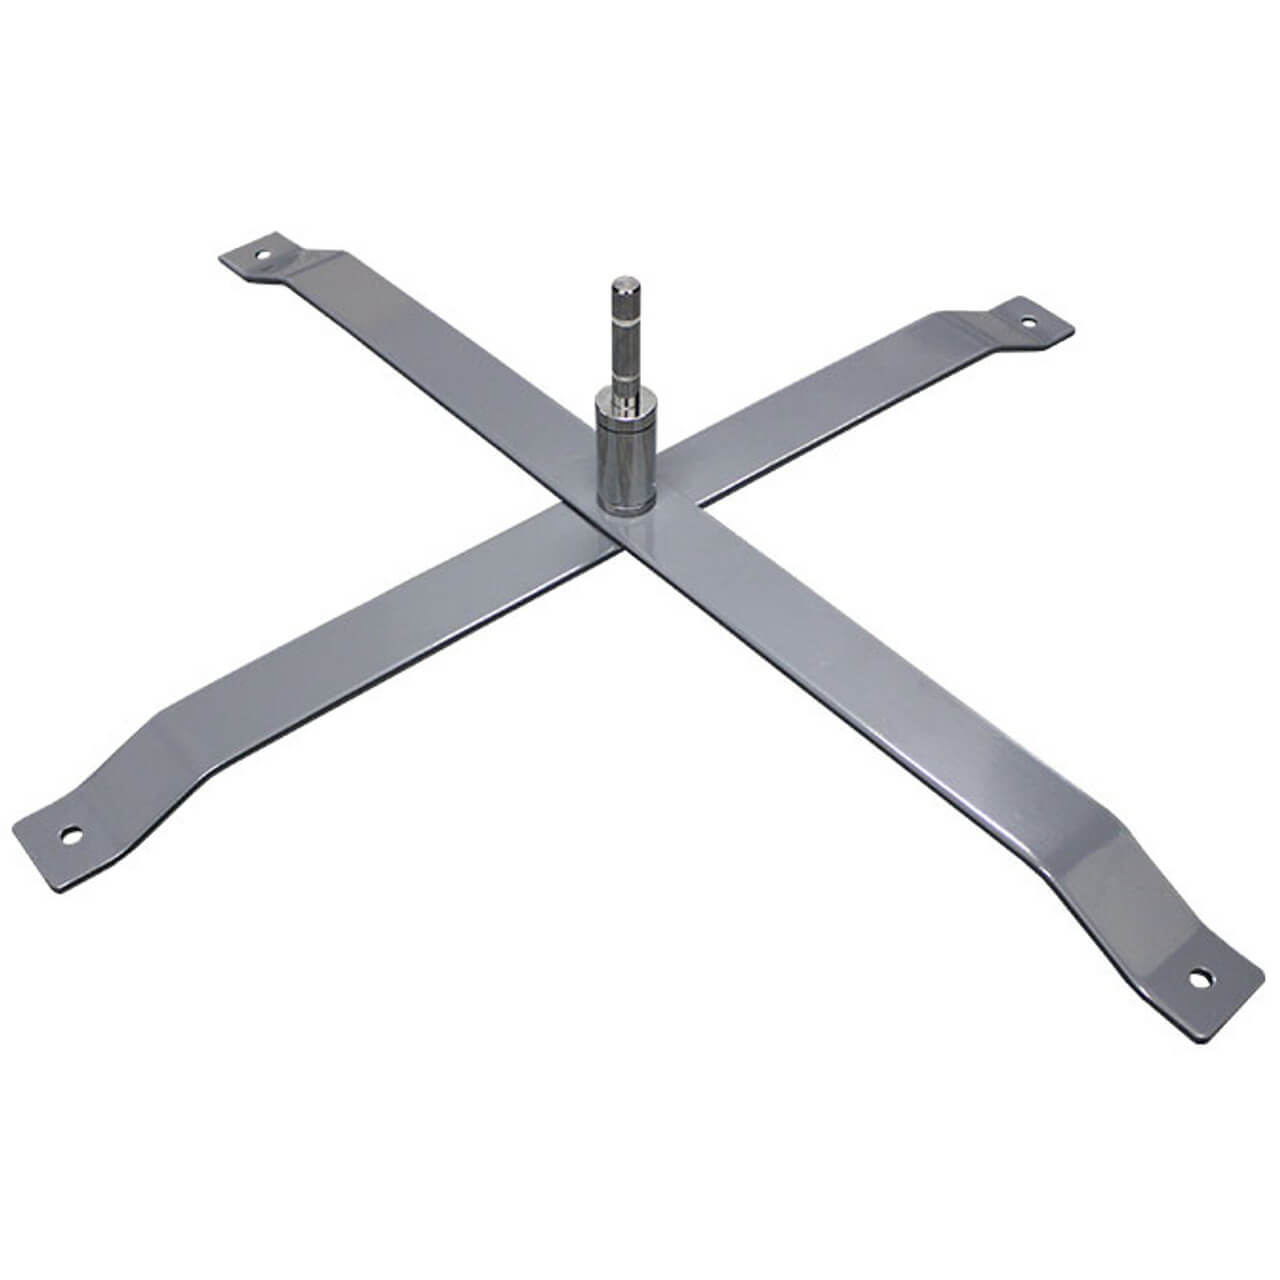 Deluxe Heavy Weight Cross Base for Sail Flag Pole